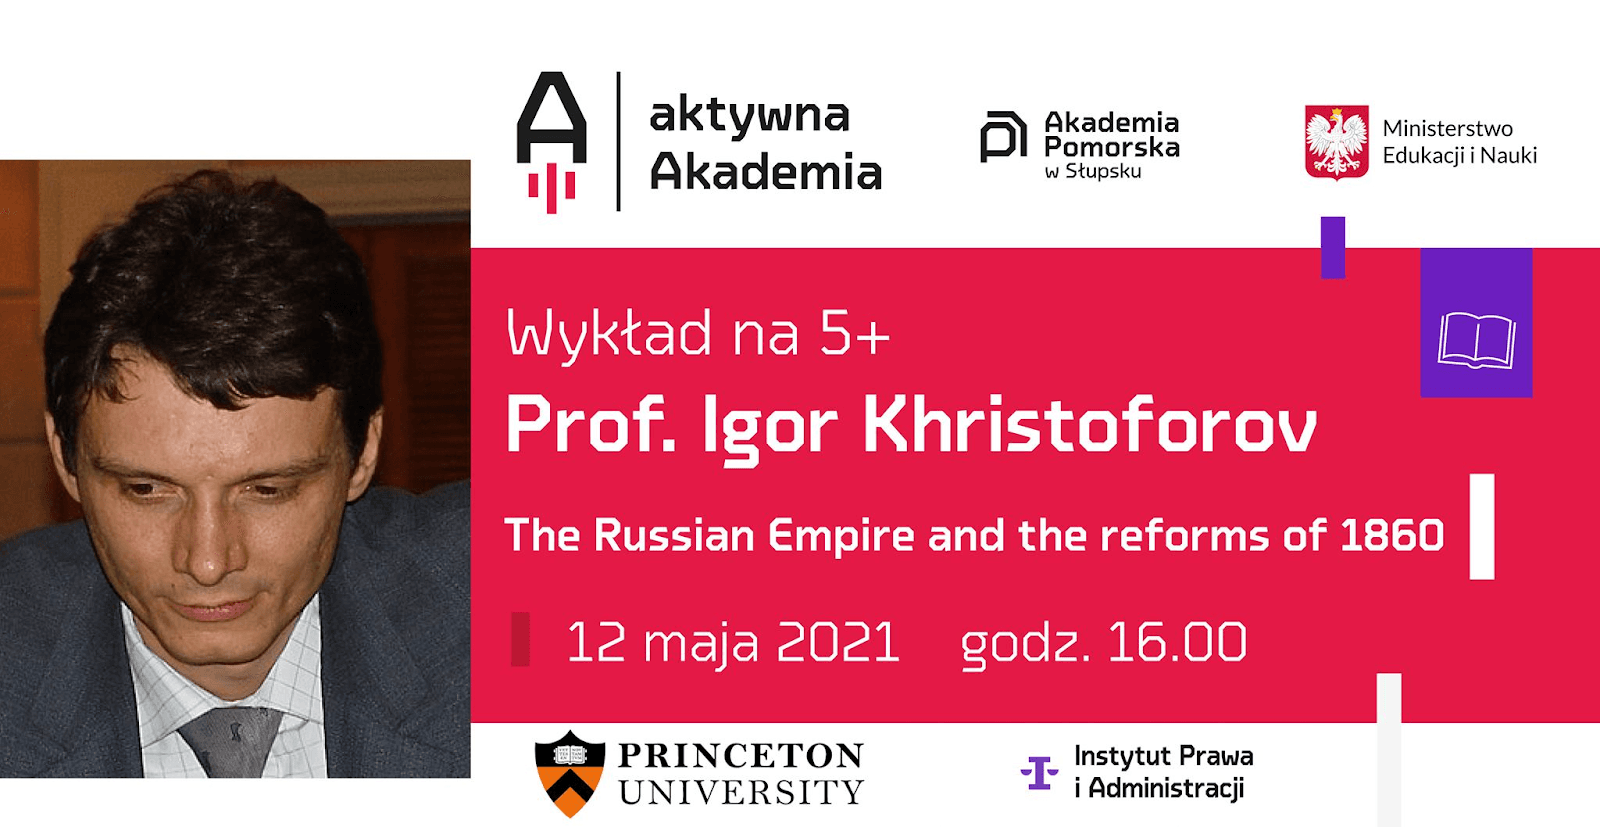 Invitation: “The Russian Empire and the Reforms of 1860” - an ‘A+ Lecture’ by Professor Igor Khristoforov of Princeton University